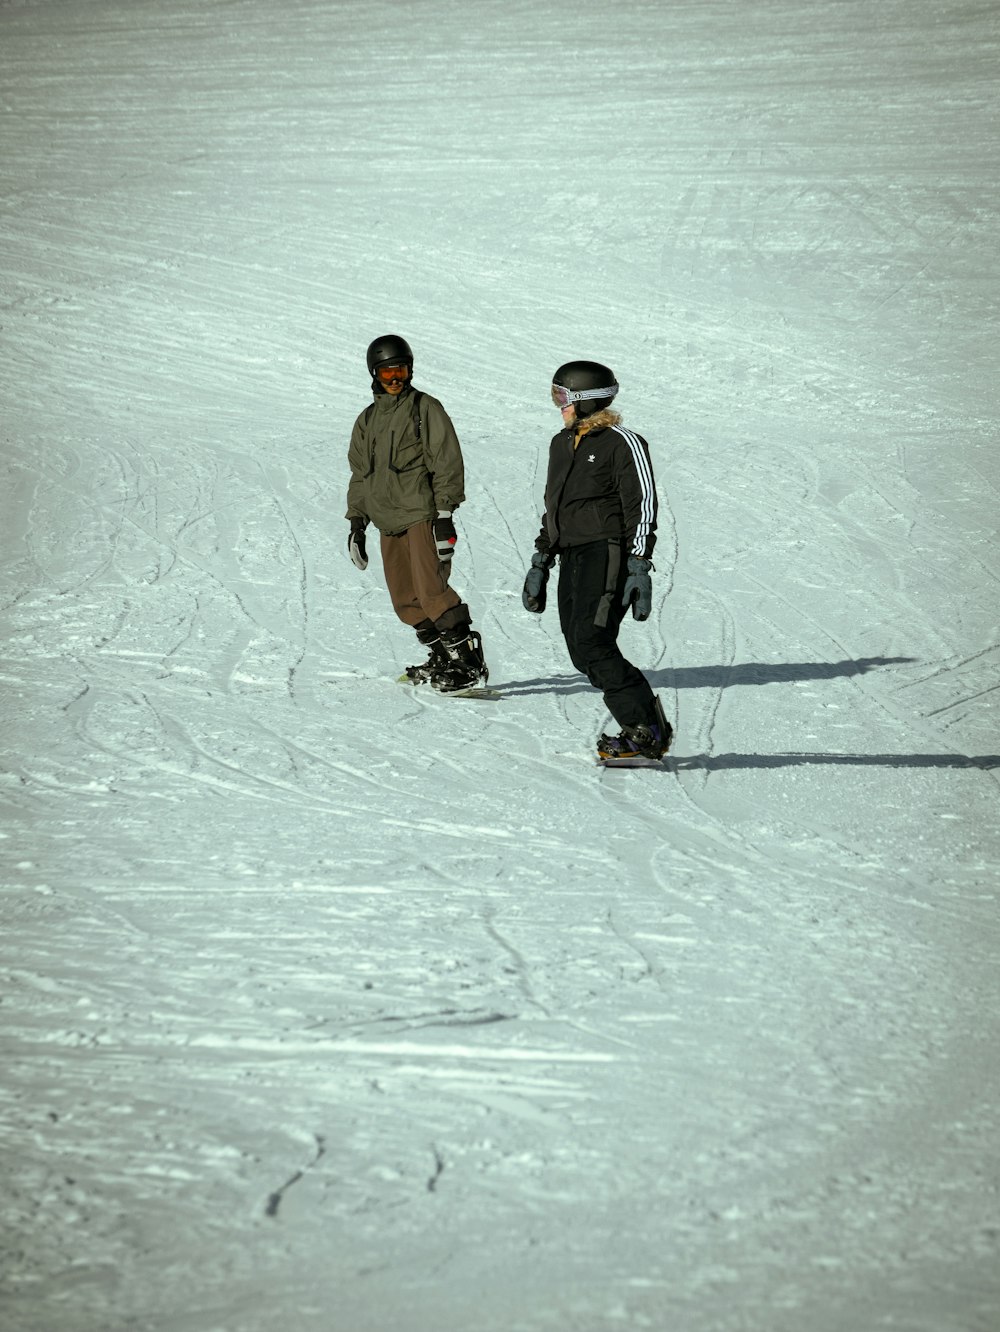 a couple of people riding snowboards down a snow covered slope